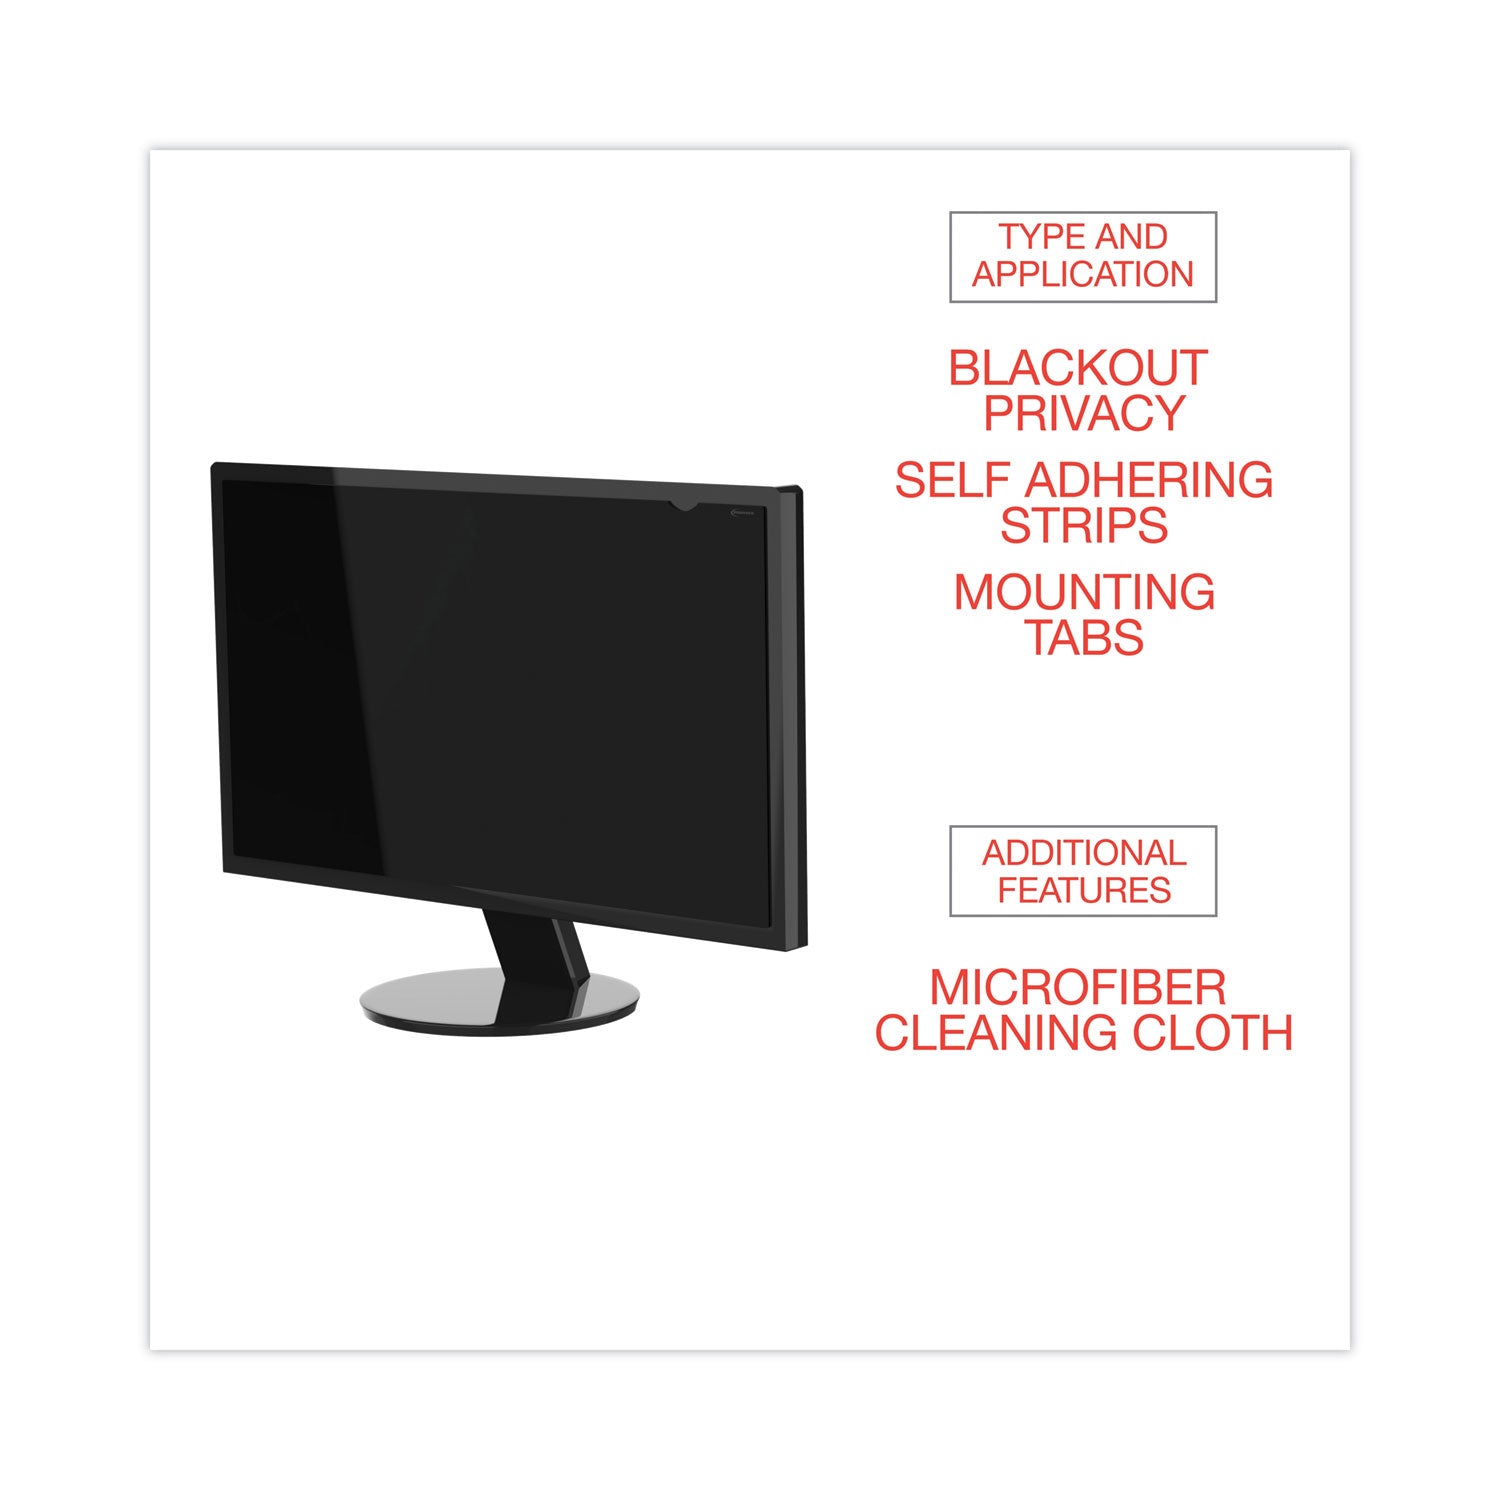 blackout-privacy-monitor-filter-for-236-widescreen-flat-panel-monitor-169-aspect-ratio_ivrblf236w - 6